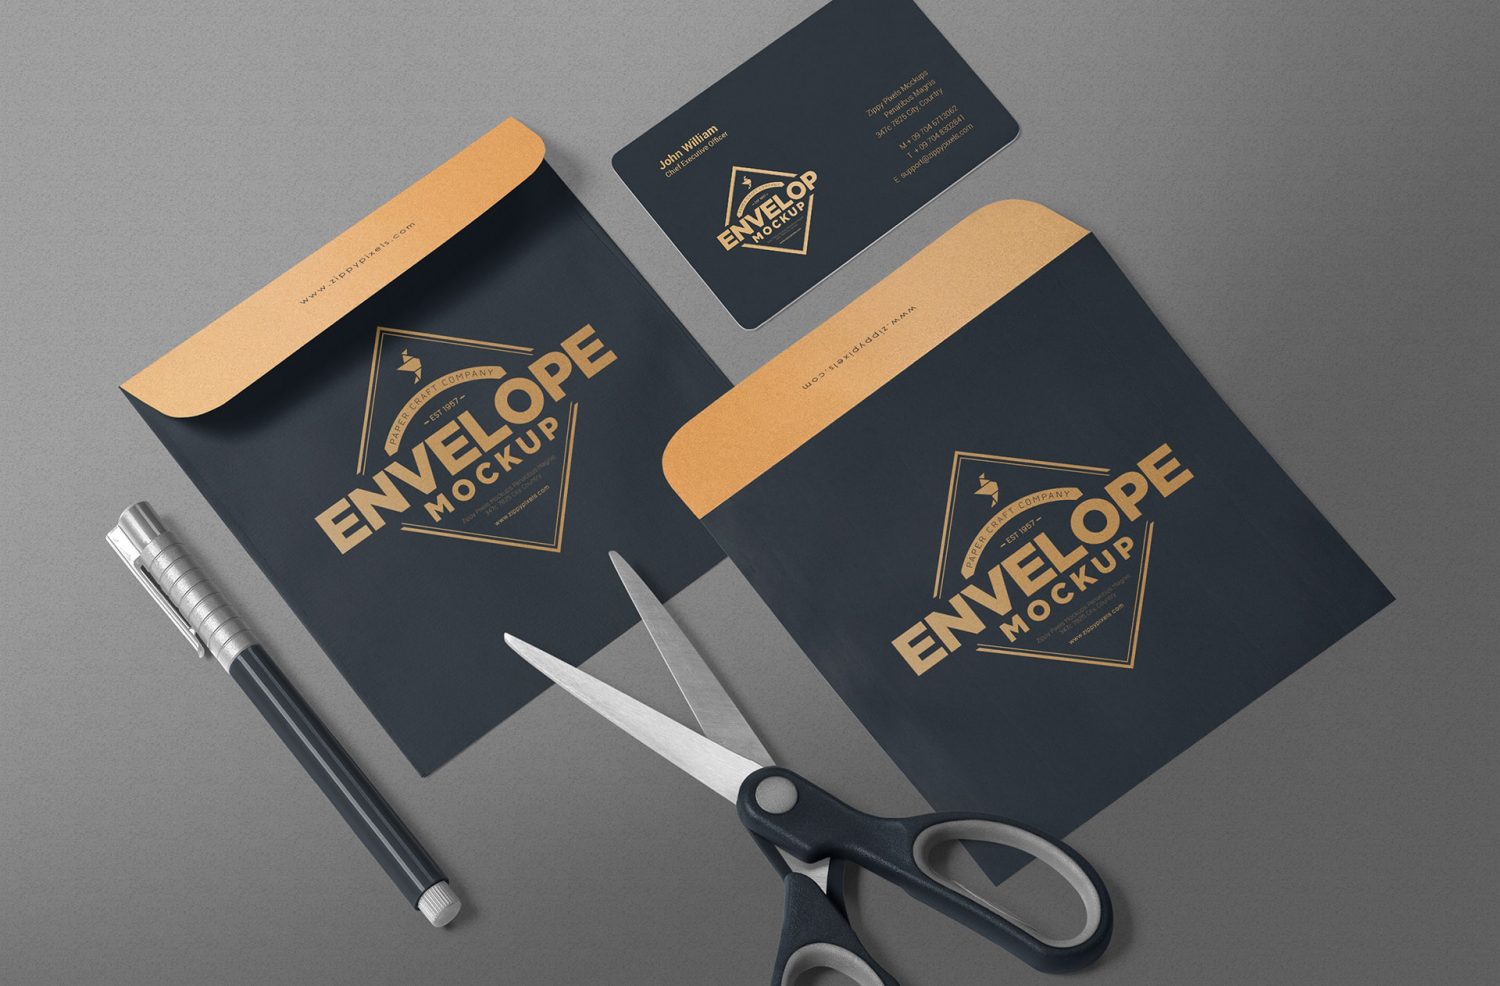 Download Free Envelope Mockup PSD in Isometric View - Best Free Mockups